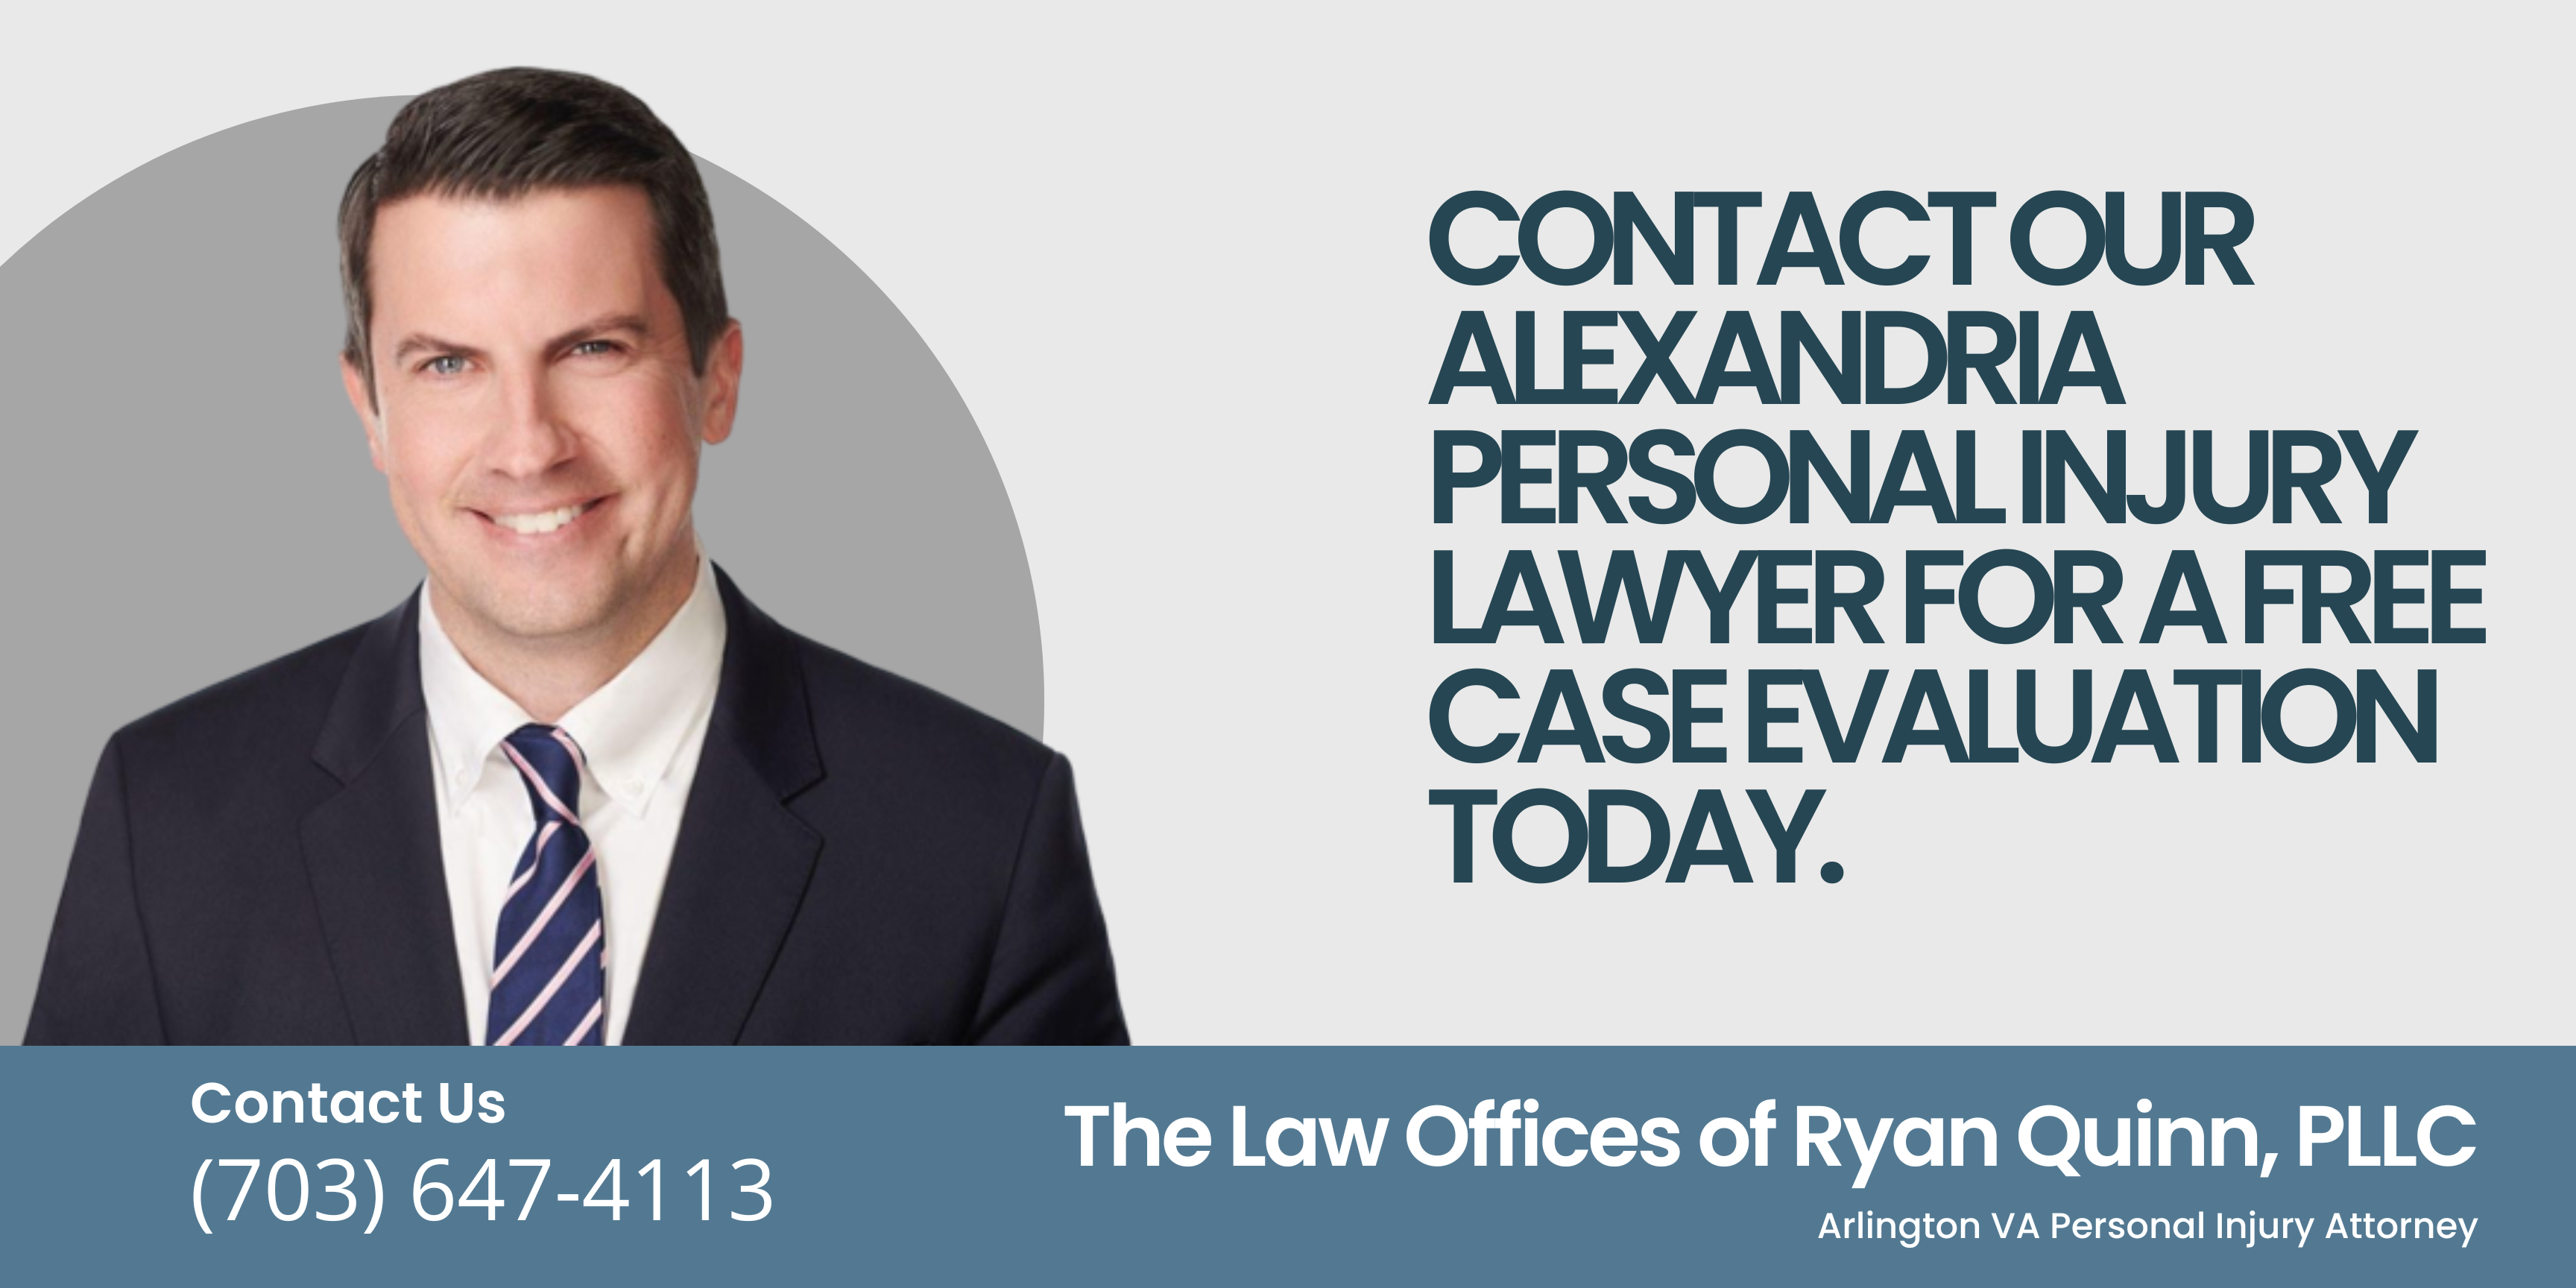 contact our Alexandria Personal Injury Lawyer